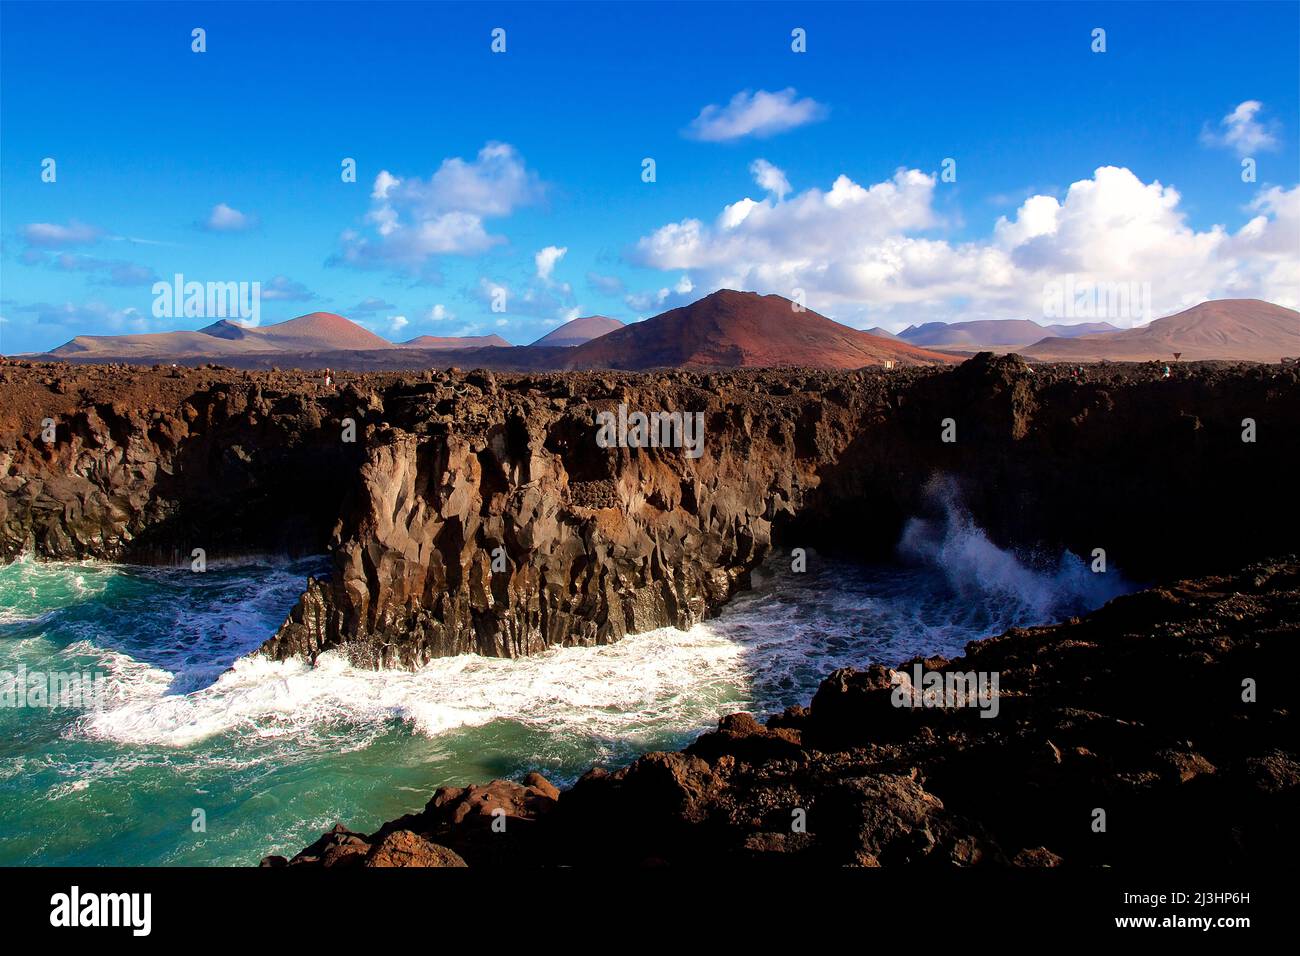 Canary Islands, Lanzarote, volcanic island, southwest coast, rugged volcanic coast, strong surf, sea caves, surf meets rugged coast, clear, blue sky, some white gray clouds, water frothing up, spray white Stock Photo